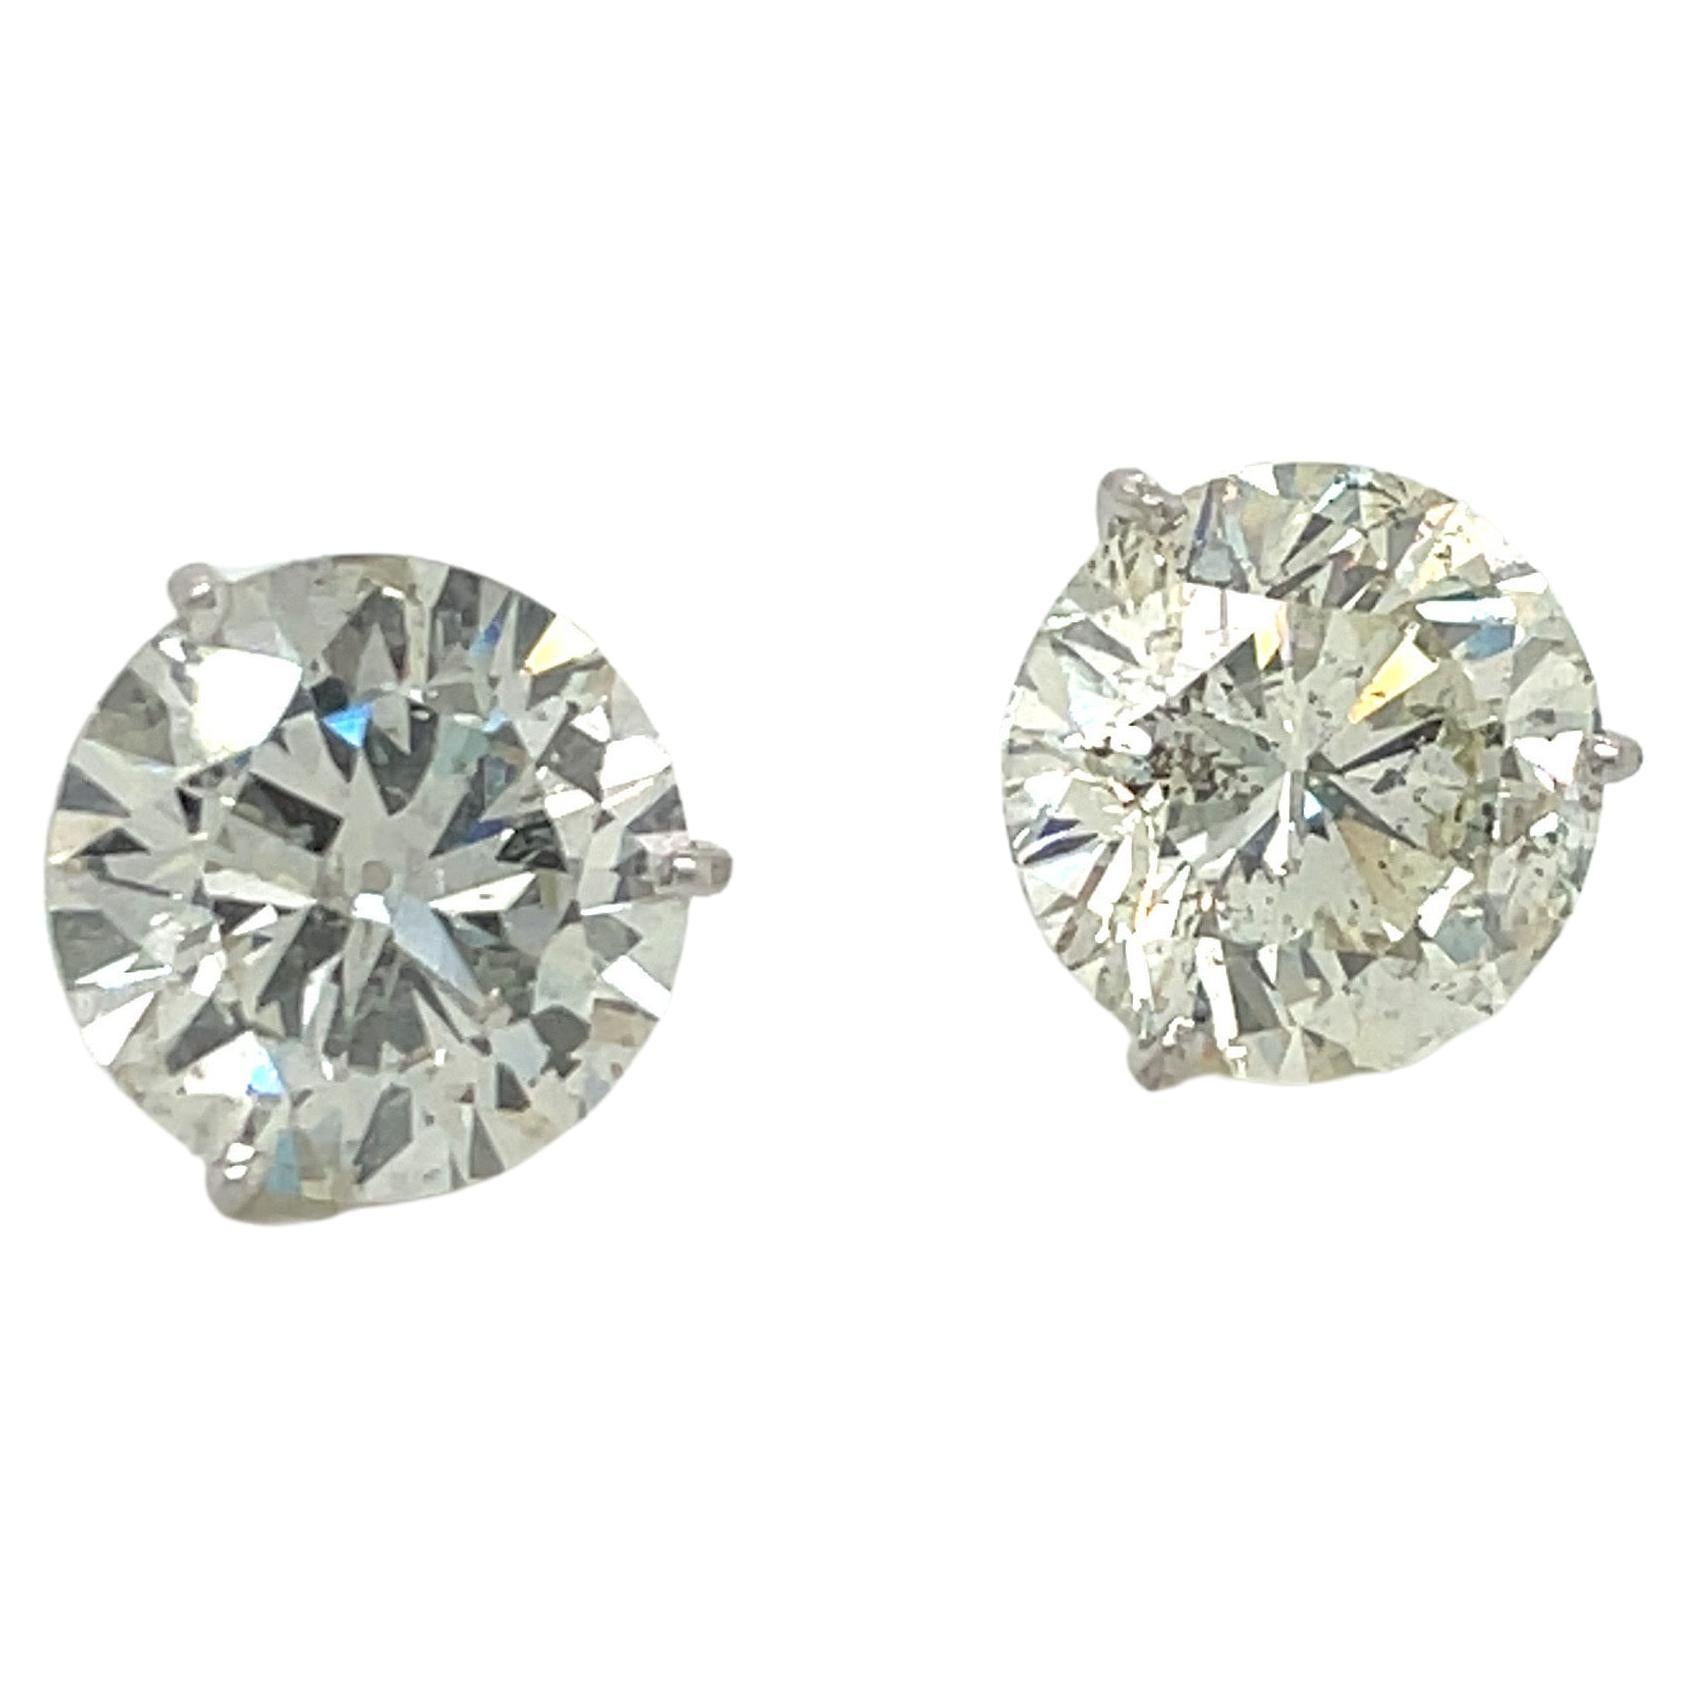 Diamond stud earrings weighing a total of 11.76 Carats in a 3 Prong Martini setting, crafted in Platinum. 
Color L
Clarity I1
Measures: 11-11.2 MM
Eye clean & lively.
Pictures show more of the inclusions. 
Video is more accurate to the naked eye. 